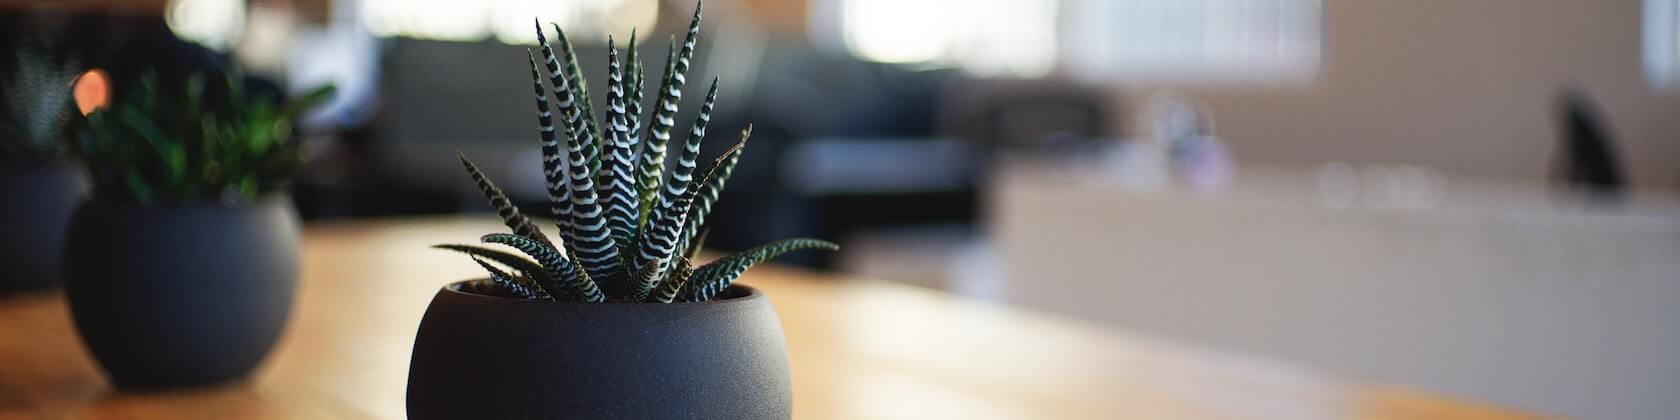 succulent plant on table with blur background - reverse mortgages featured image - bc mortgage broker website